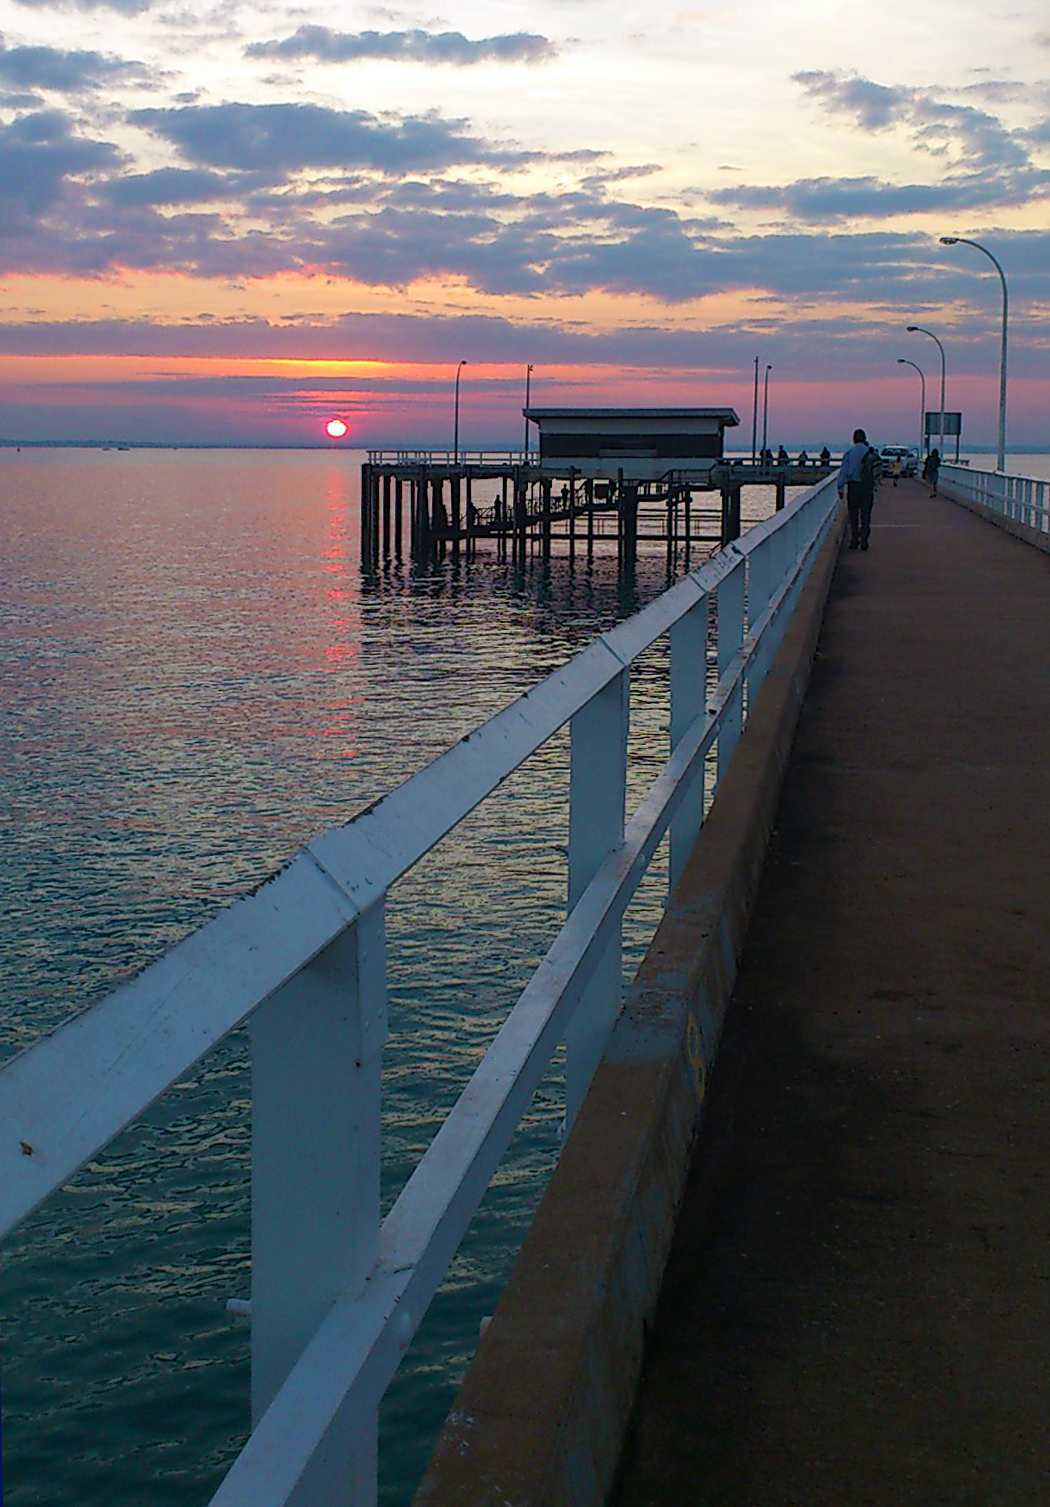 Mandorah Jetty is a land-based hot spot across the Harbour from Darwin.